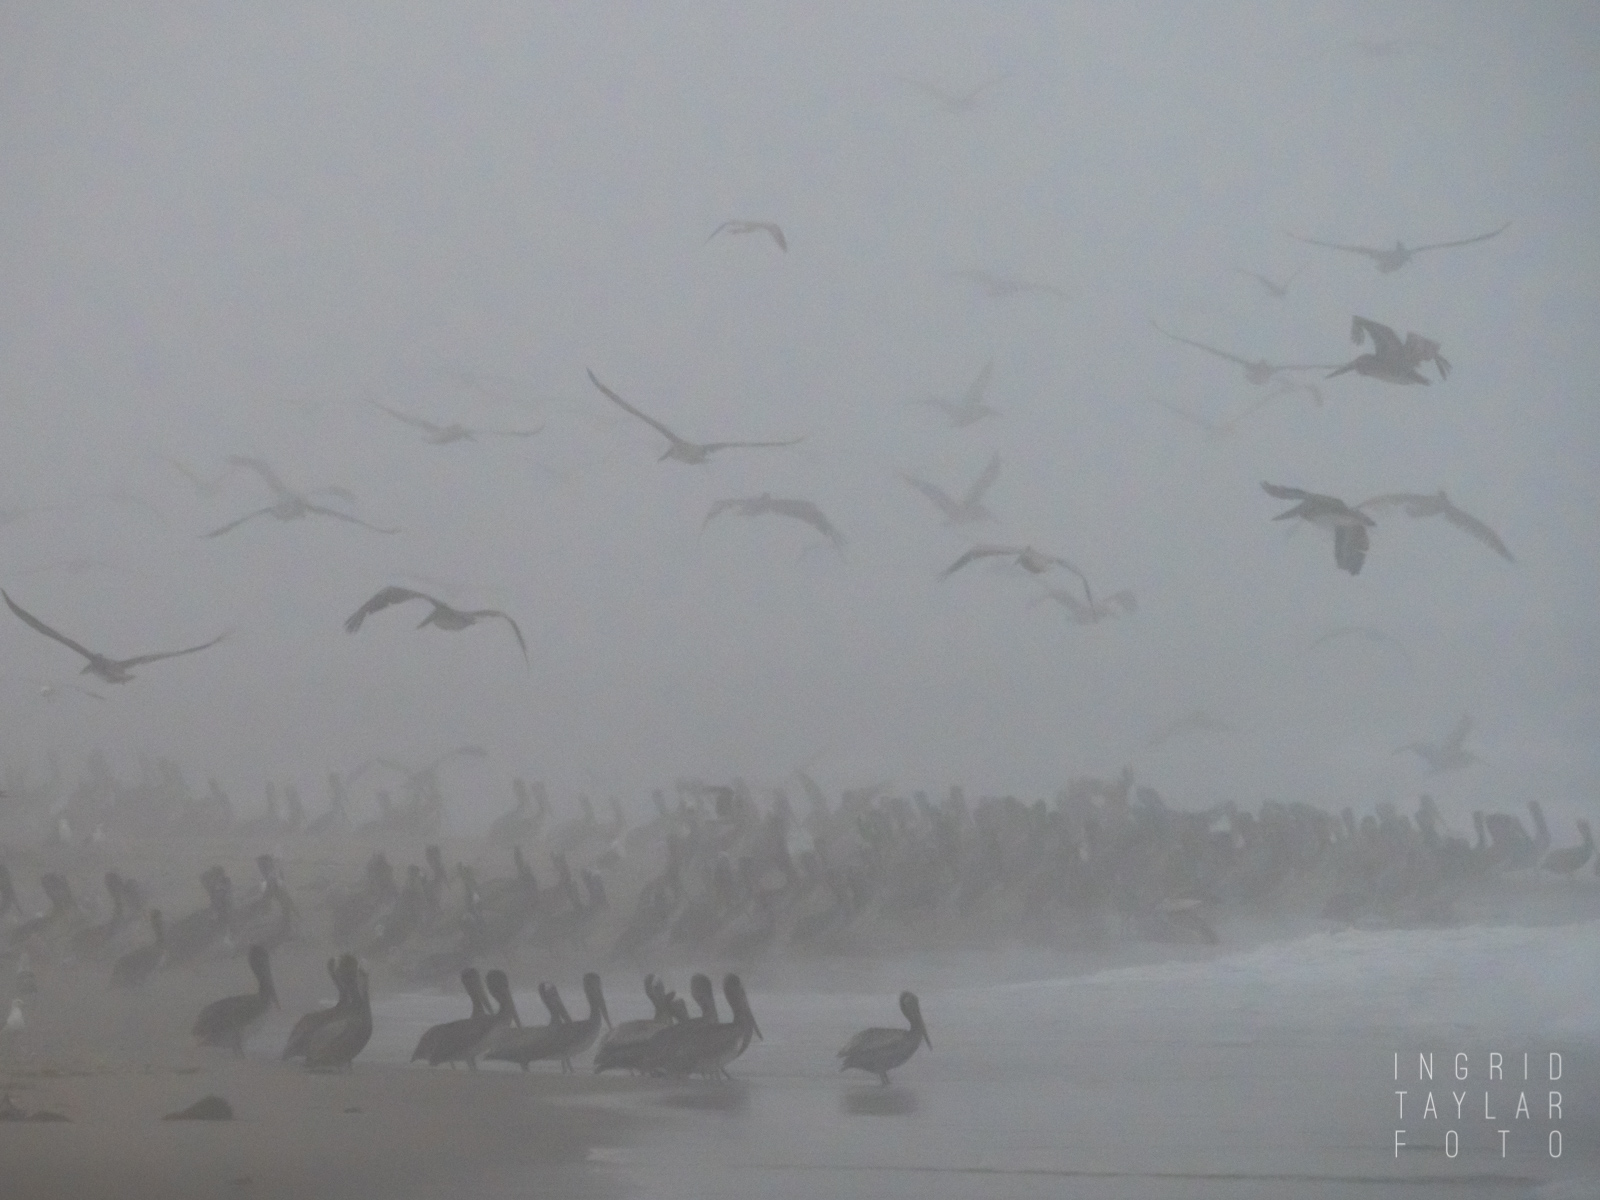 Brown Pelicans on the Beach in the Fog